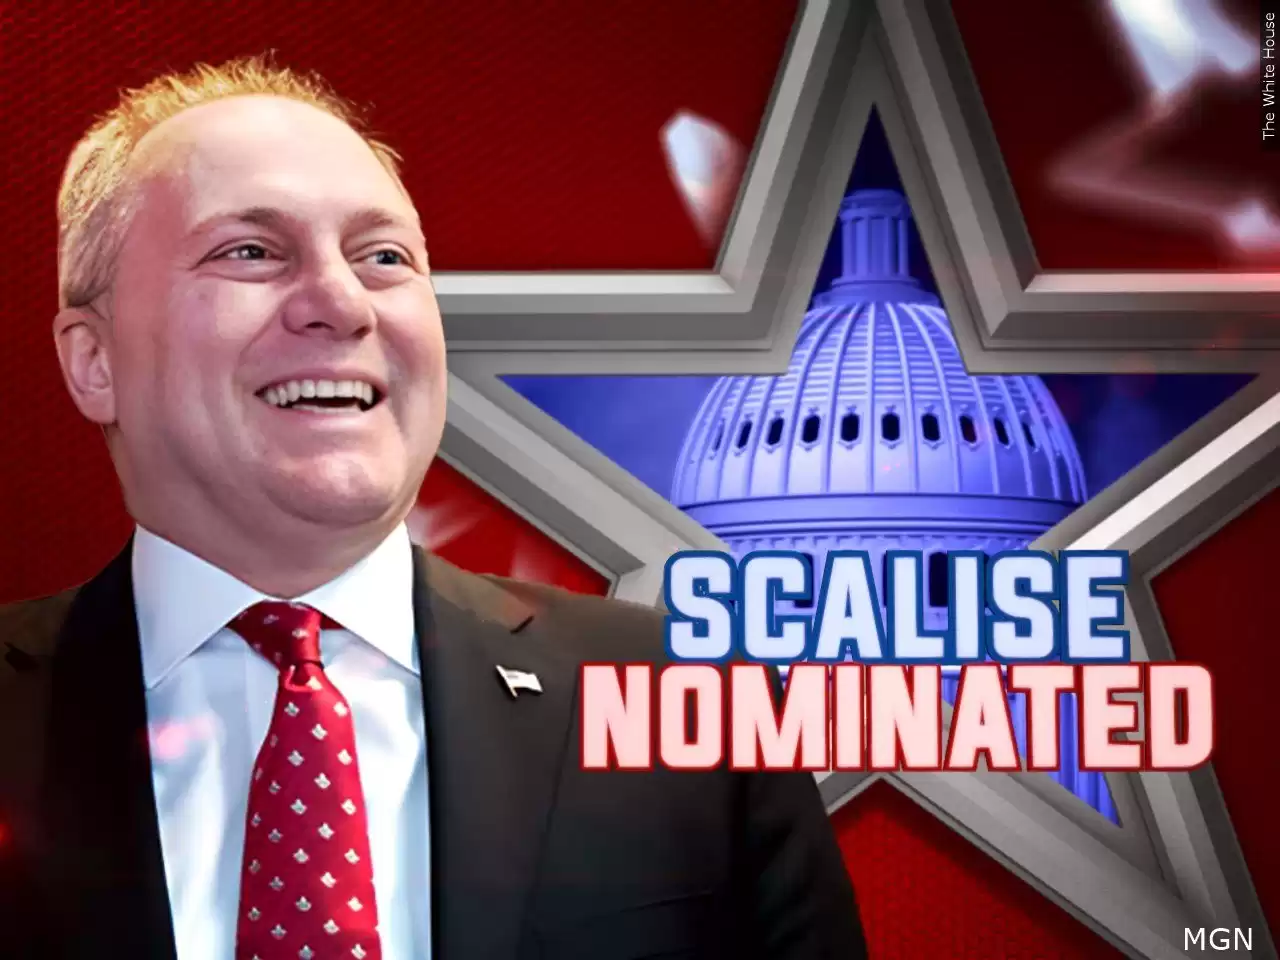 Republicans nominate Steve Scalise for House speaker but struggle to unite quickly and elect him